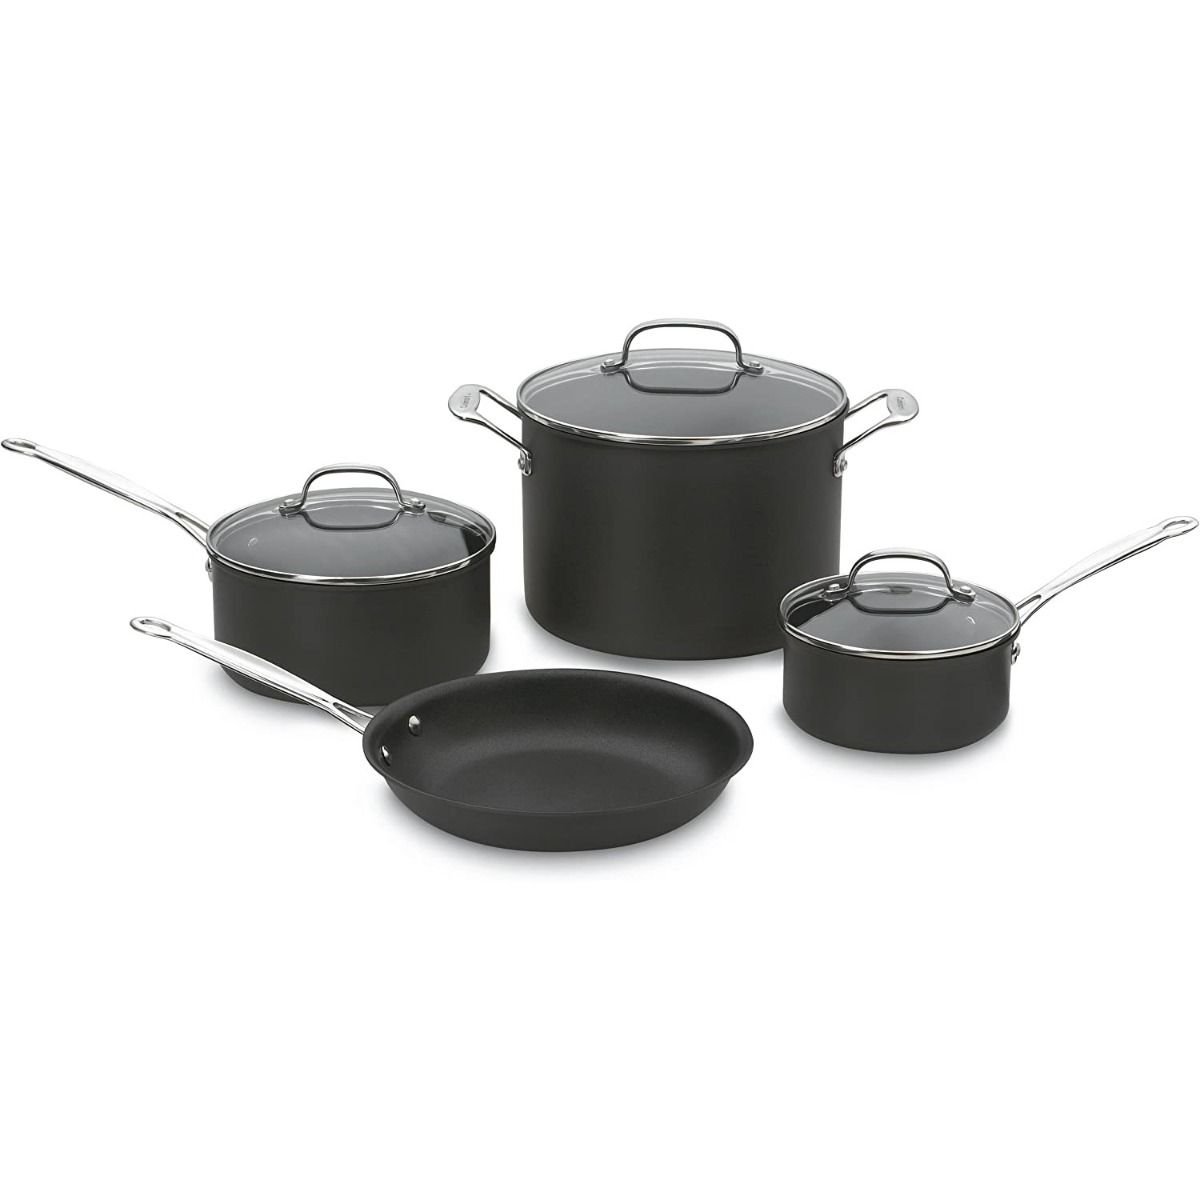 Cuisinart Chef's Classic Nonstick Hard-Anodized 13-inch by 20-inch Double Burner